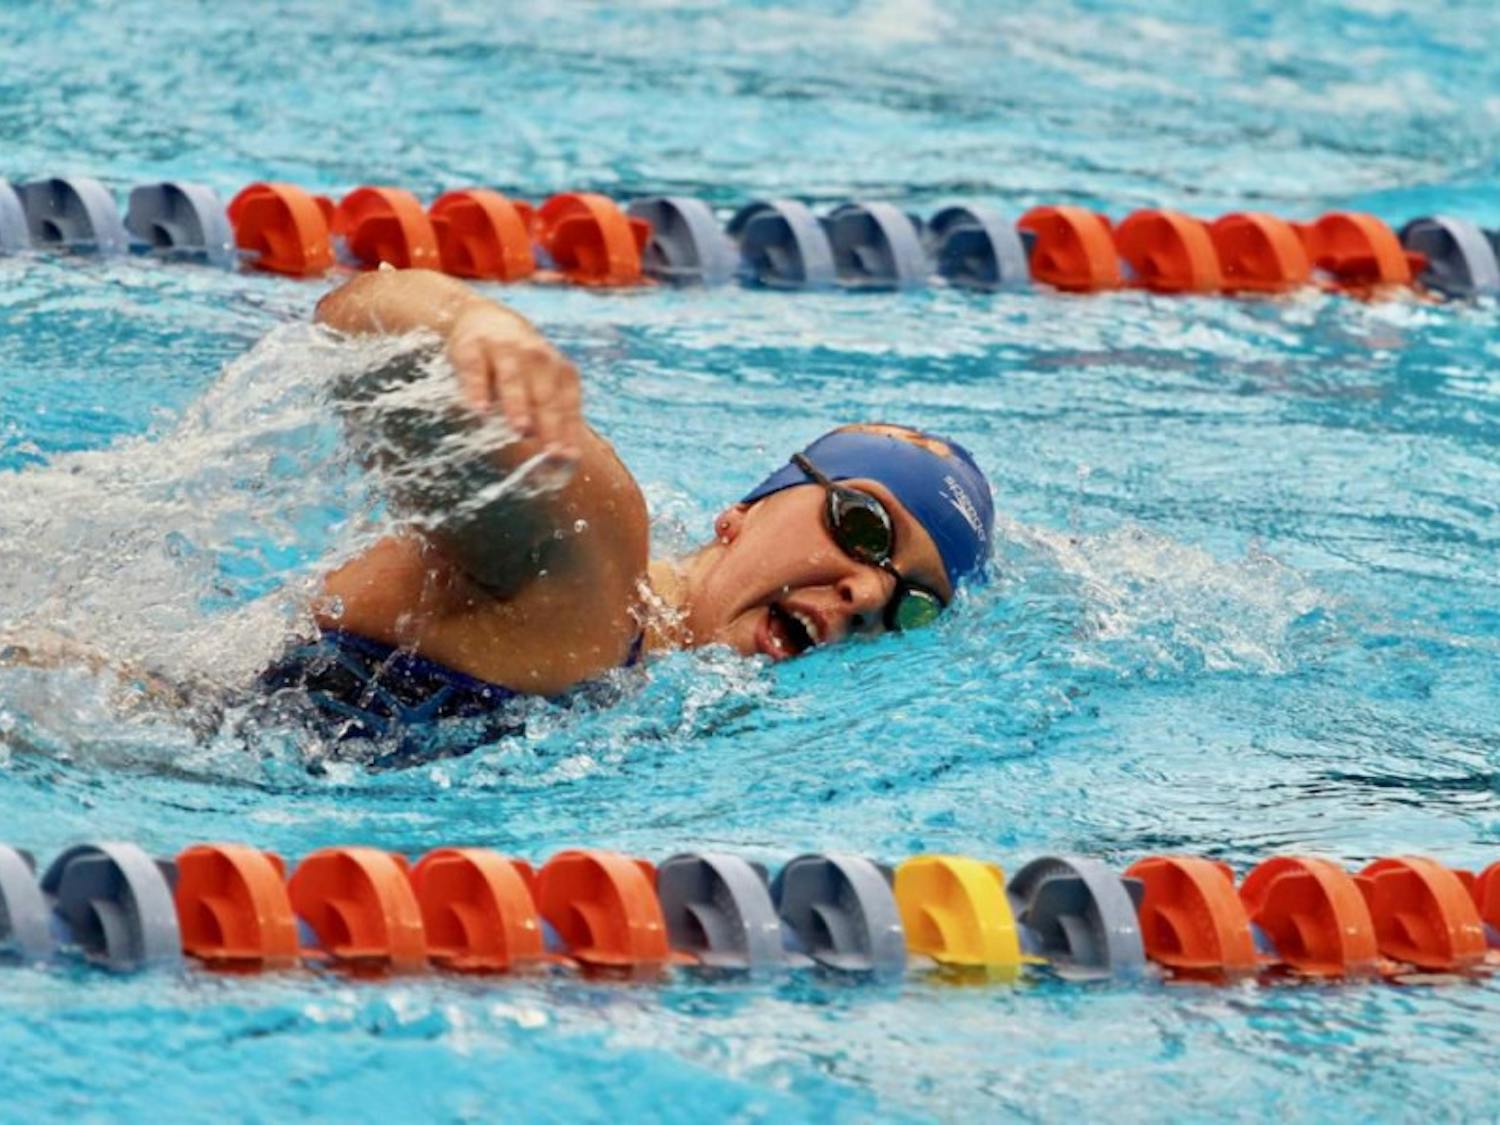 Florida sophomore Taylor Ault notched two second-place finishes in both the 500 free (4:48.38) and the 1,650 free (16:29.57) in her last meet.